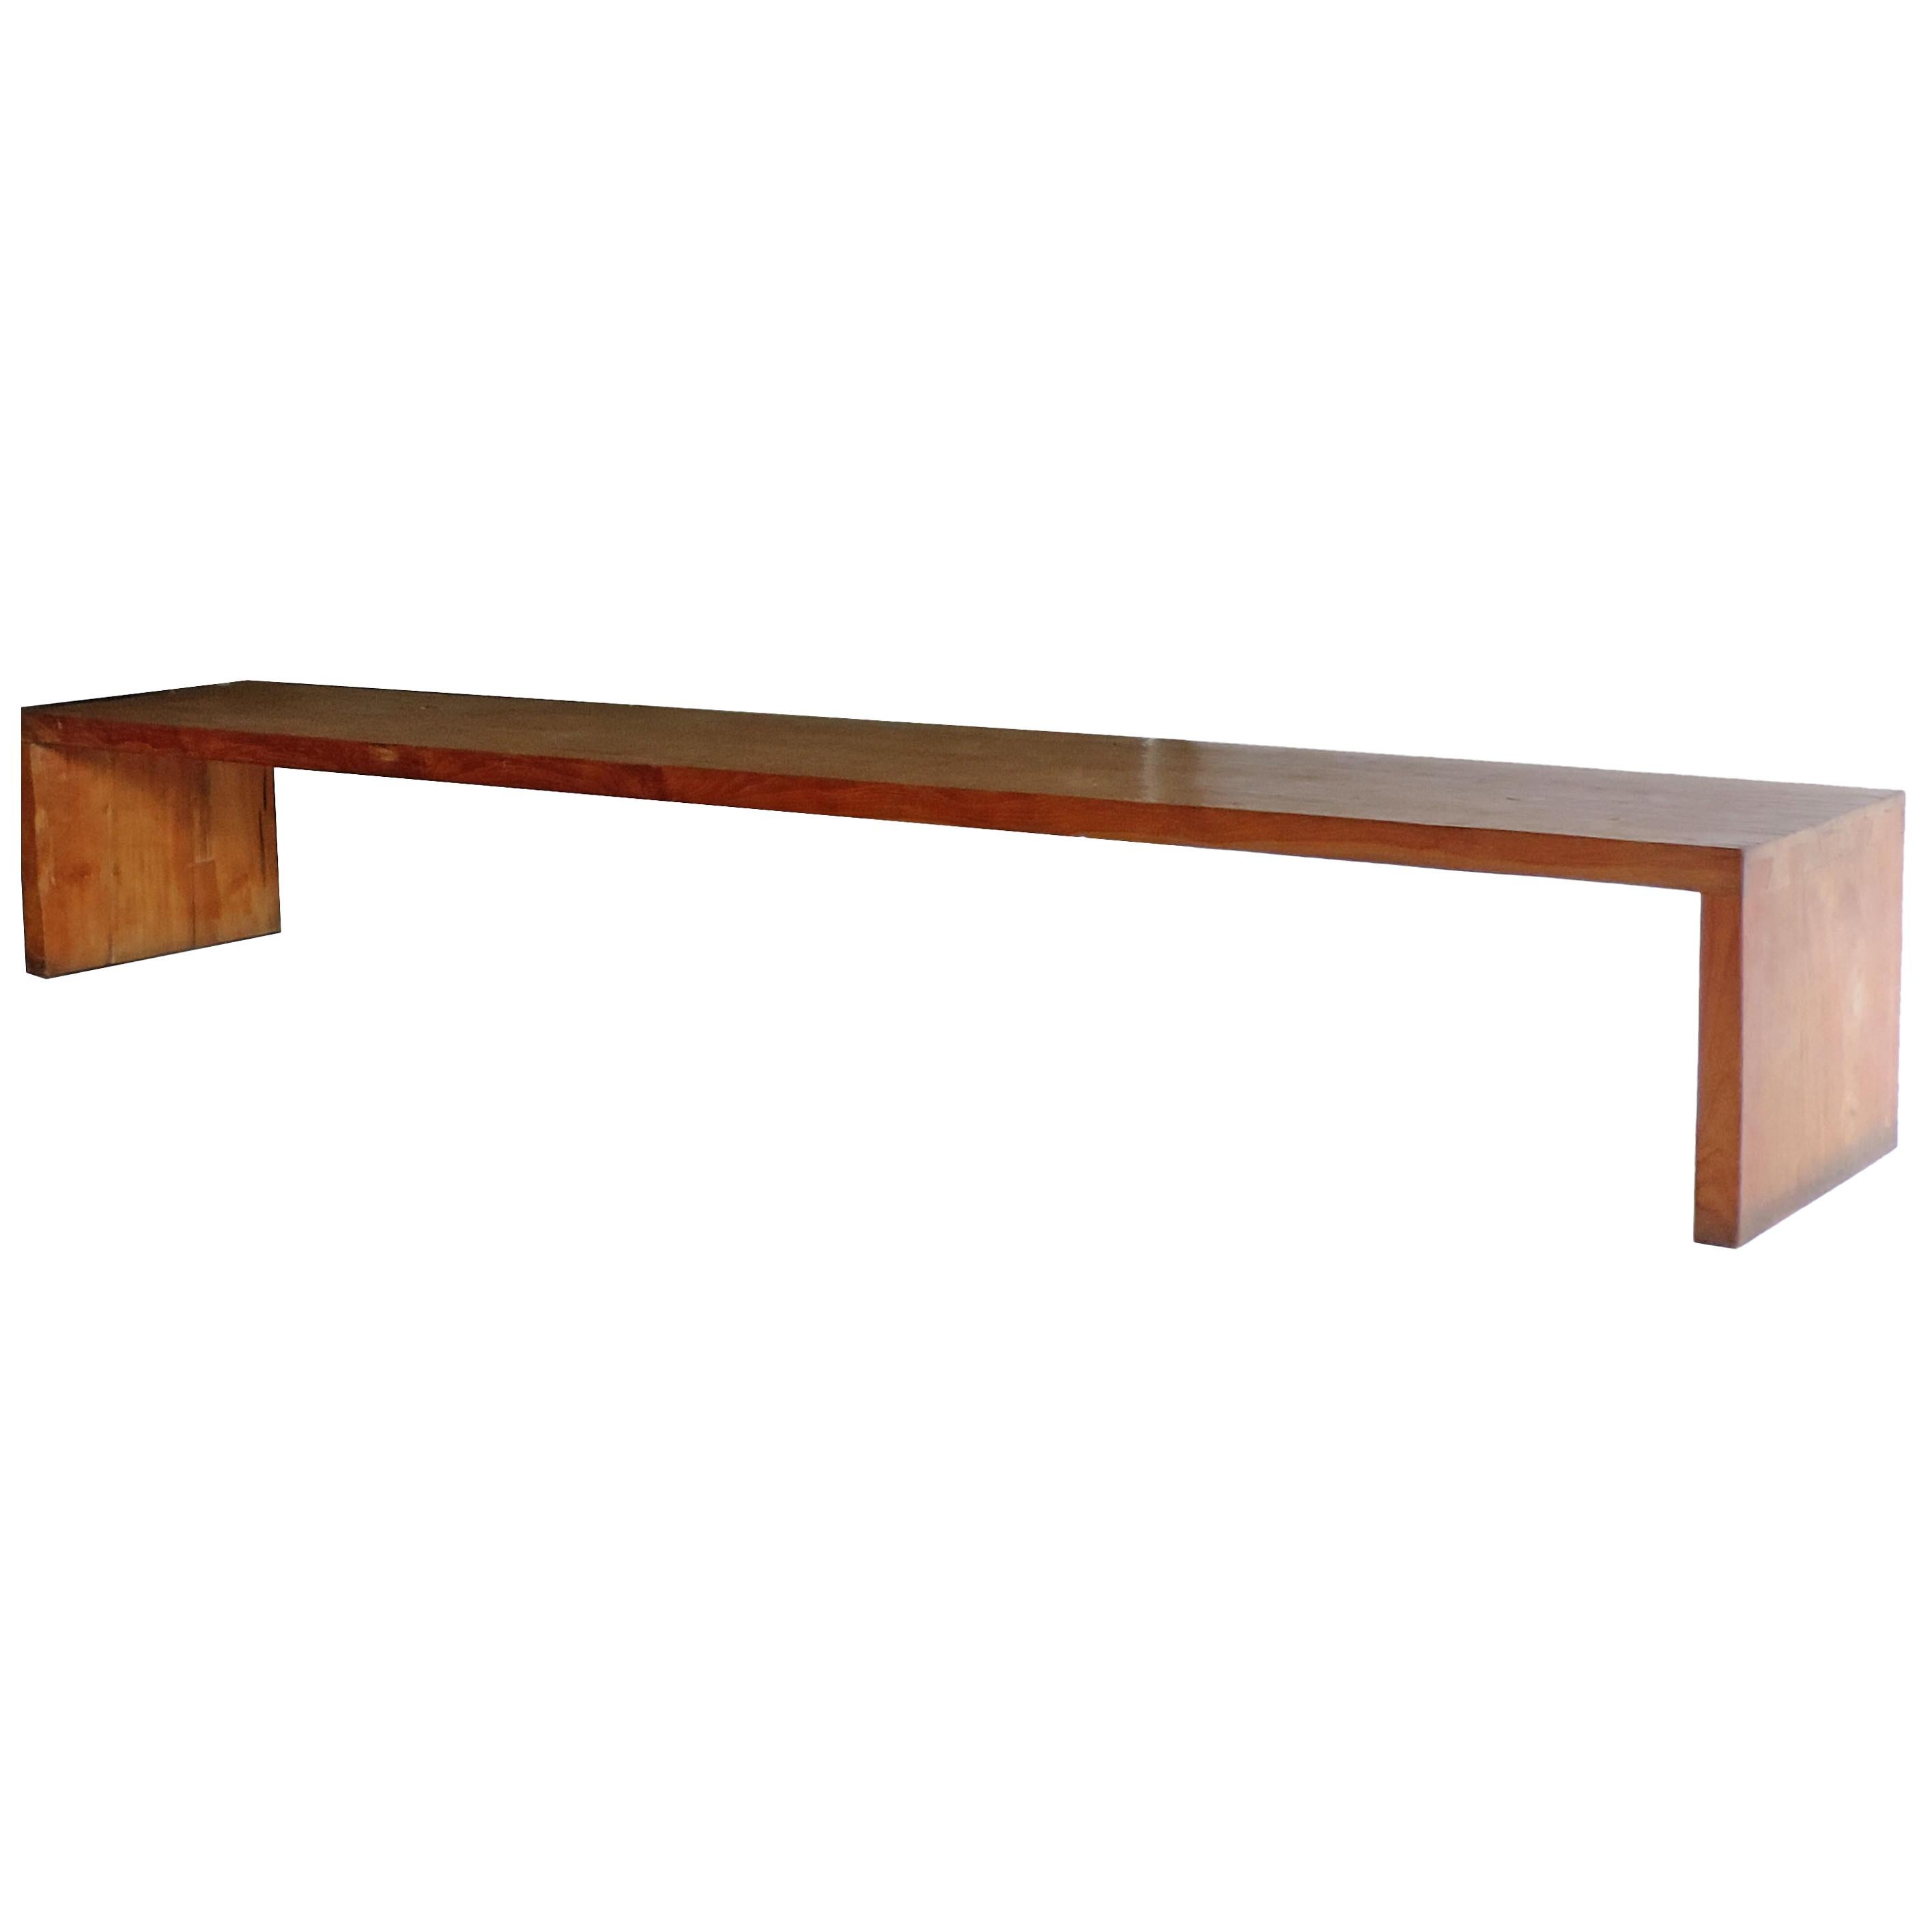 Monumental American Craft Wooden Bench, 1970s For Sale